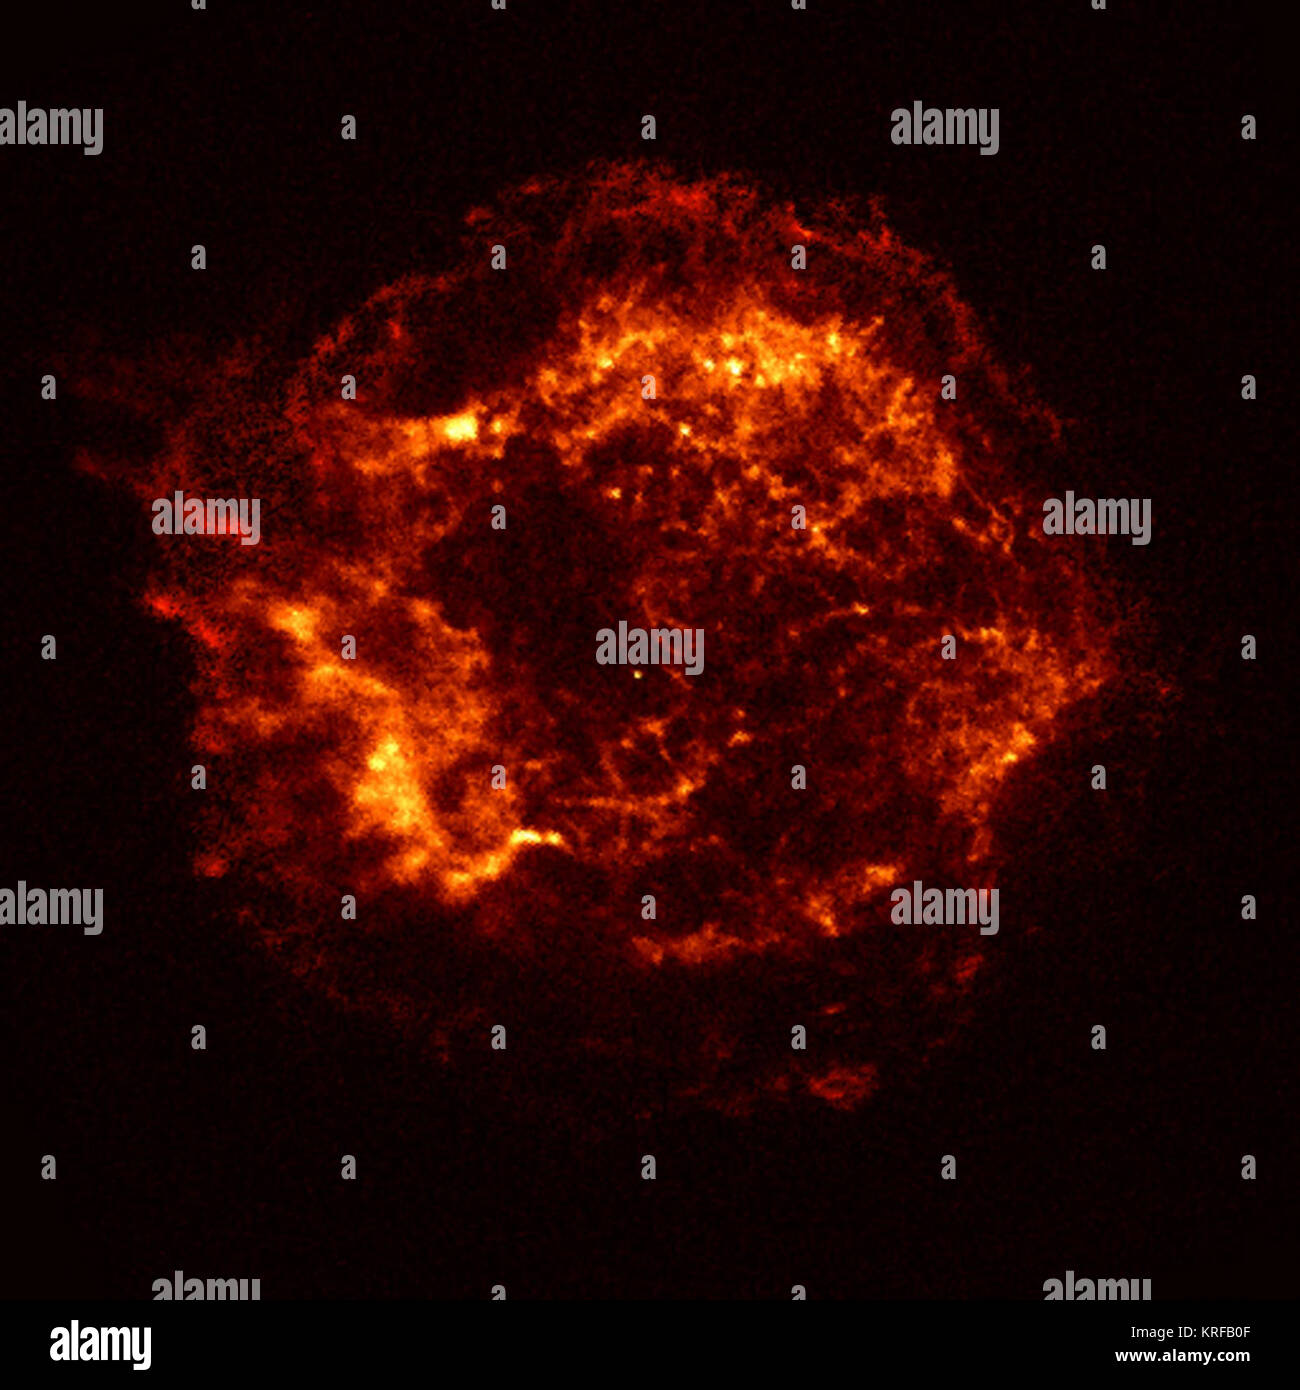 This X-ray image of the Cassiopeia A (Cas A) supernova remnant is the official first light image of the Chandra X-ray Observatory. The 5,000 second image was made with the Advanced CCD Imaging Spectrometer (ACIS). Two shock waves are visible: a fast outer shock and a slower inner shock. The inner shock wave is believed to be due to the collision of the ejecta from the supernova explosion with a circumstellar shell of material, heating it to a temperature of ten million degrees Celsius. The outer shock wave is analogous to an awesome sonic boom resulting from this collision. The bright object n Stock Photo